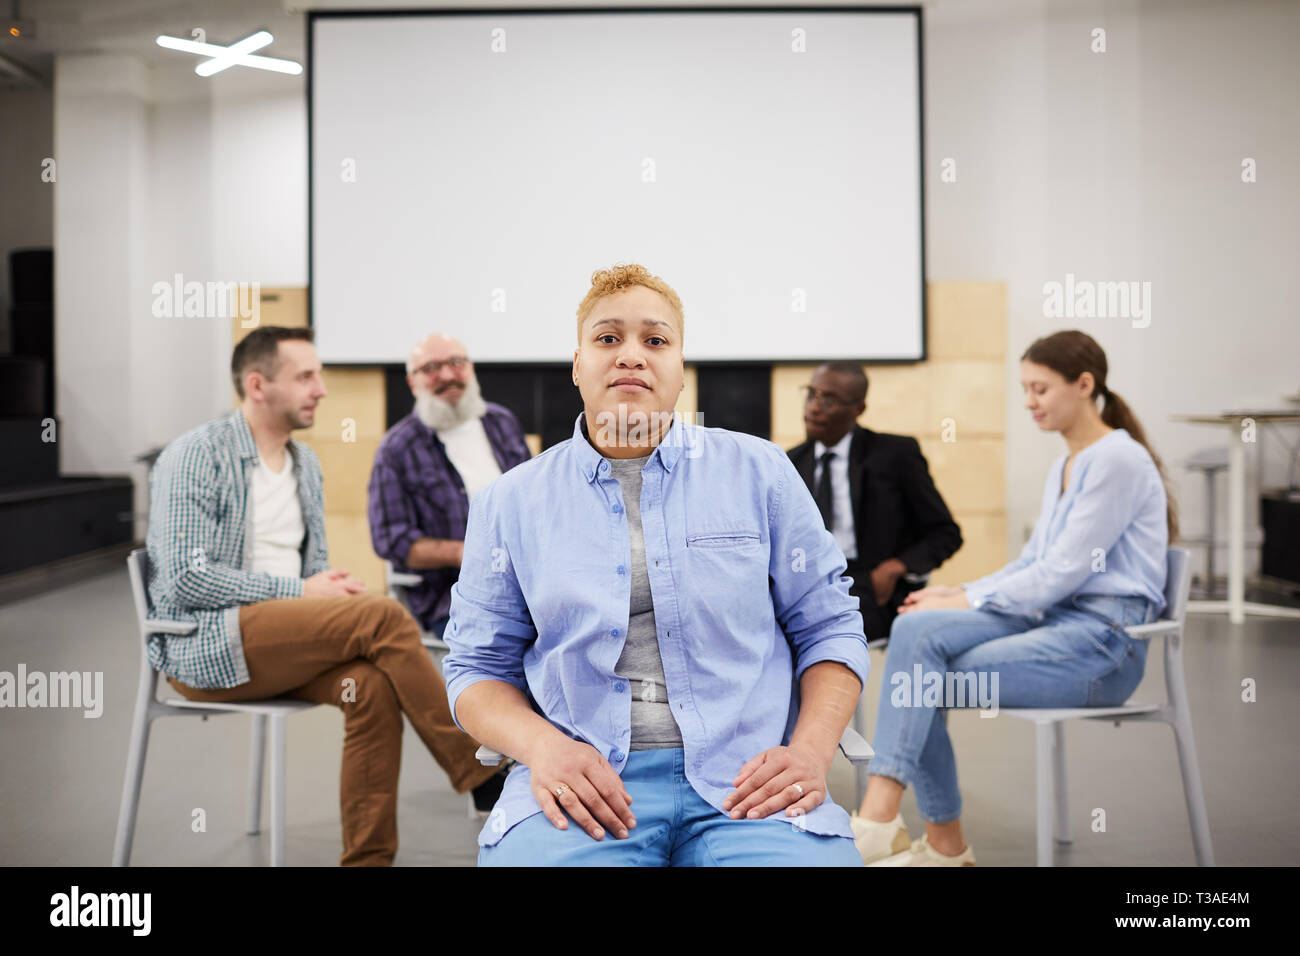 Woman Posing in Group Therapy Stock Photo